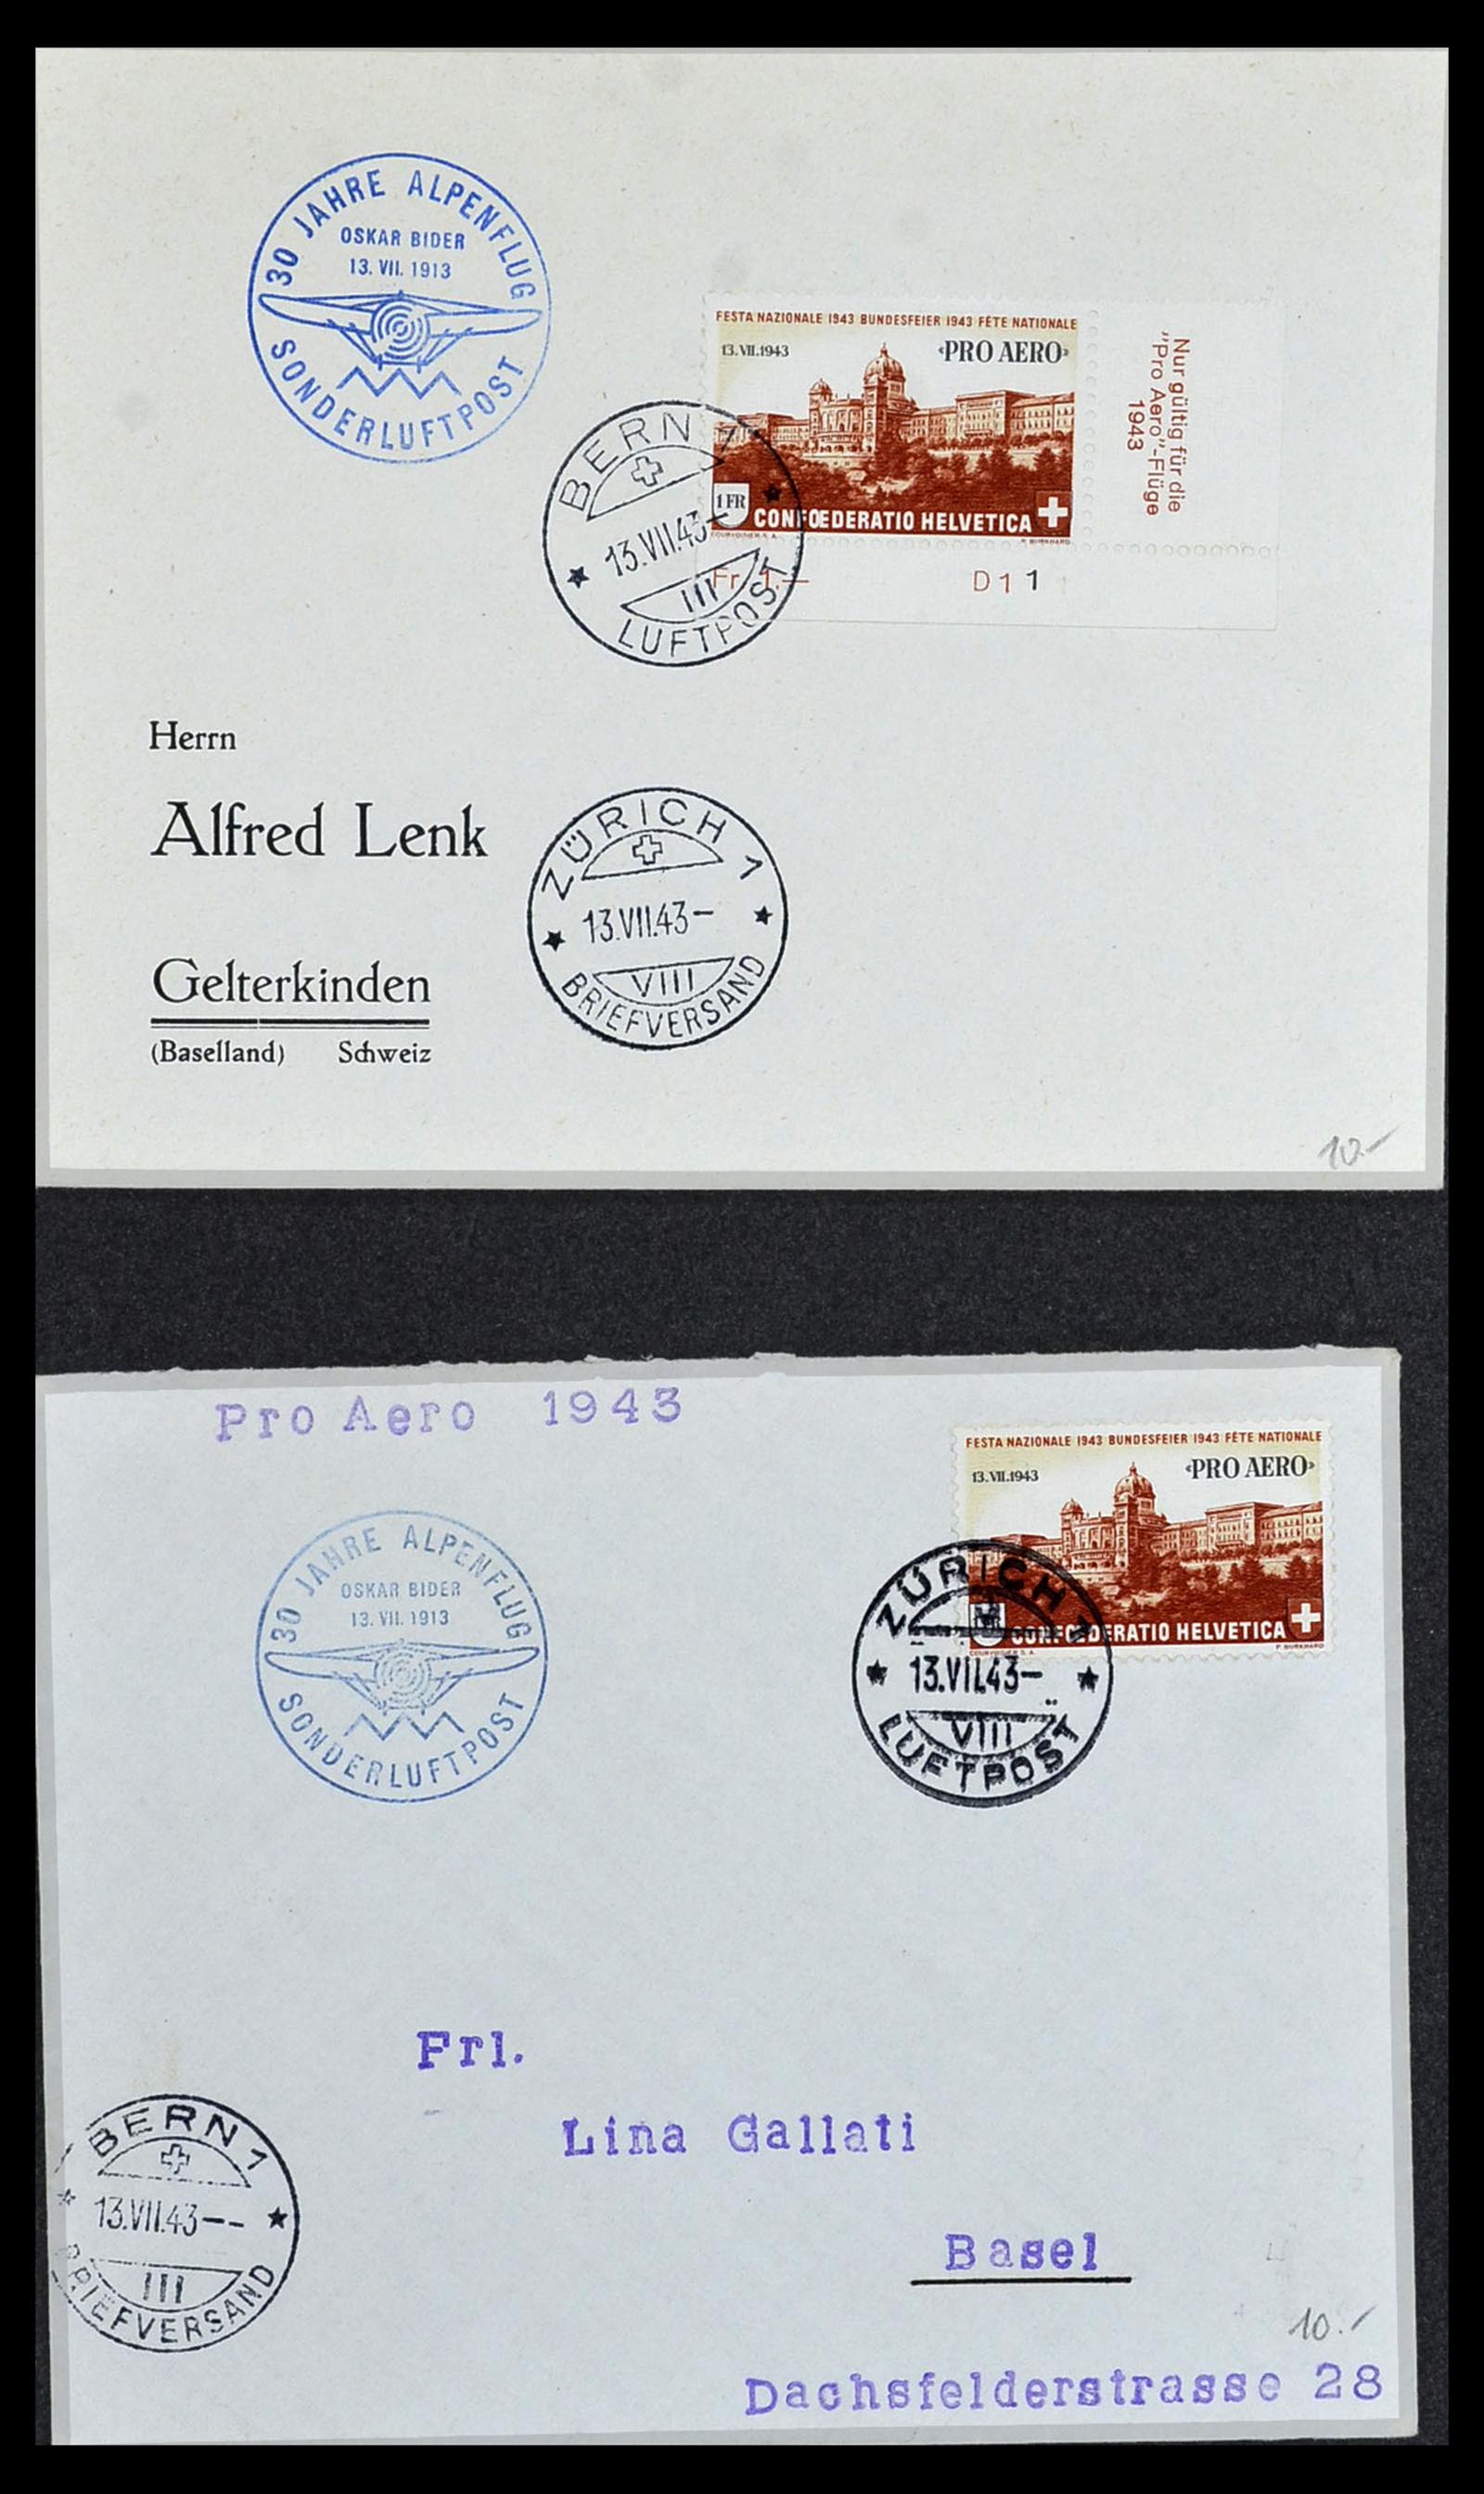 34141 086 - Stamp collection 34141 Switzerland airmail covers 1920-1960.